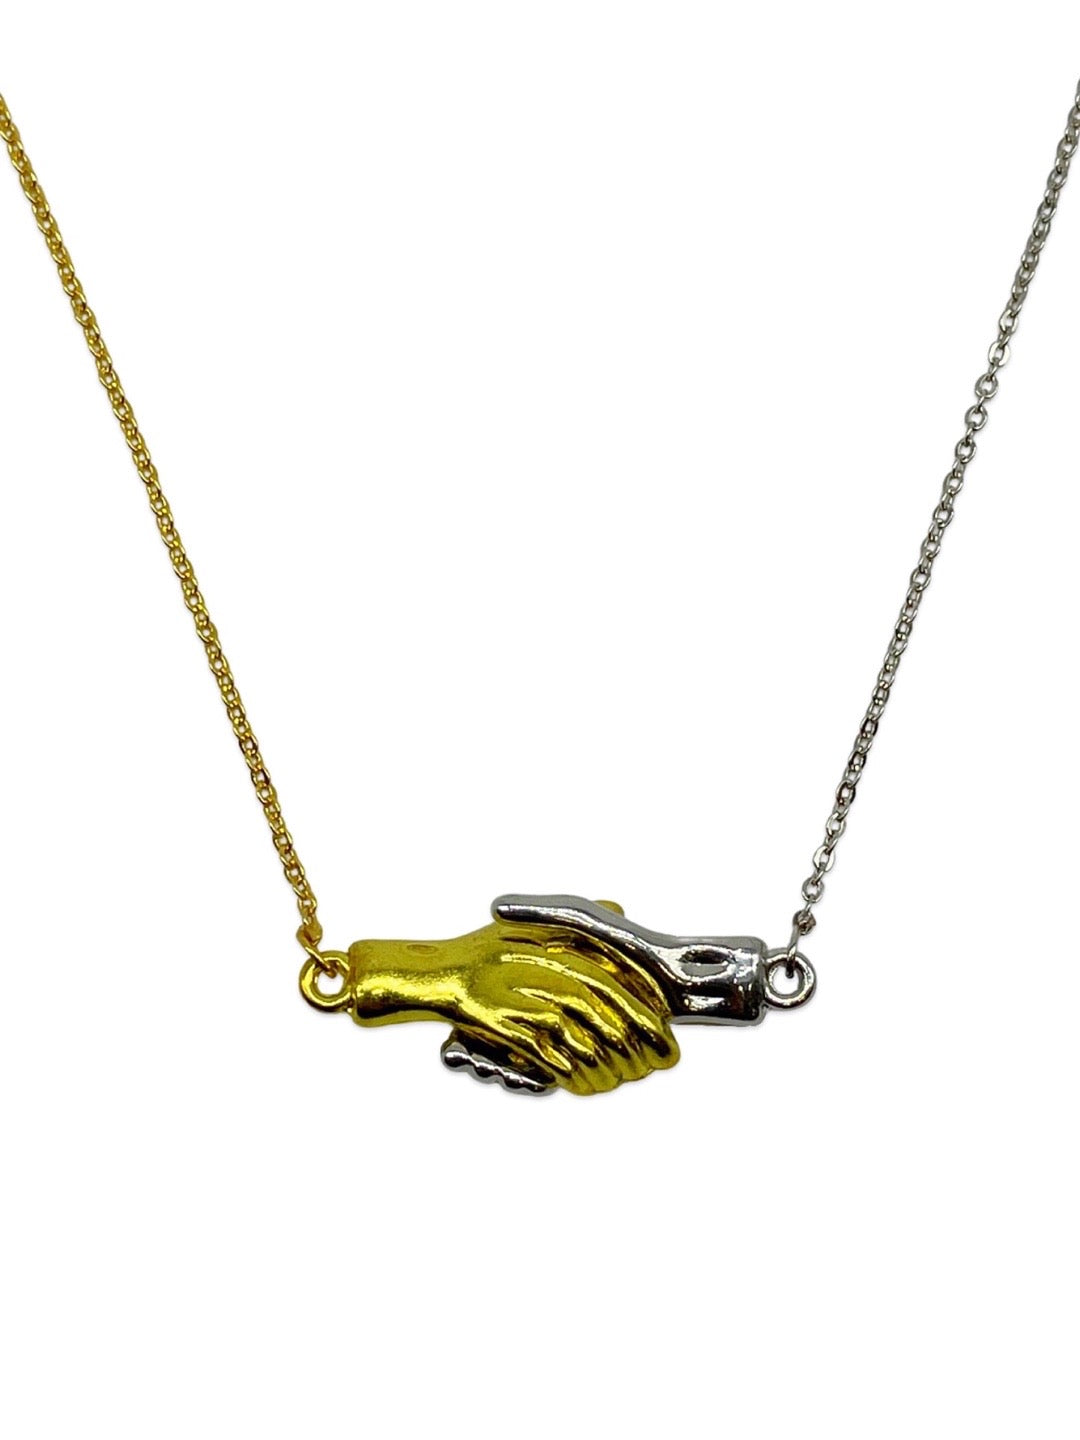 Silver/Gold Plated Hand Magnet Necklace